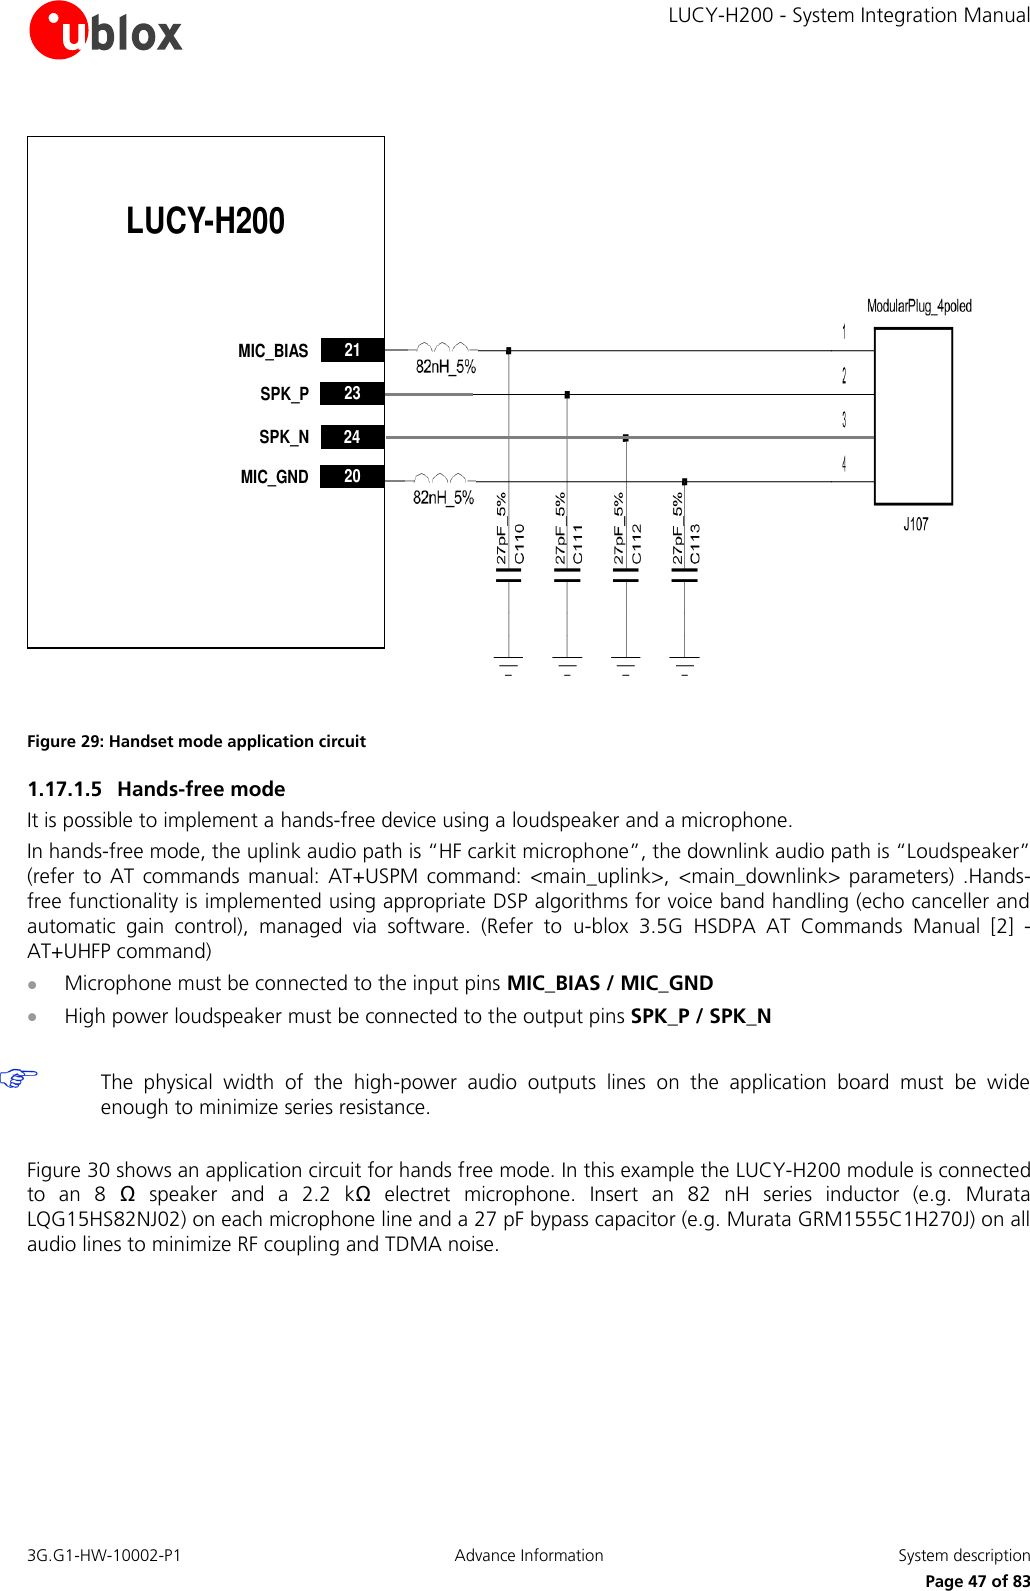     LUCY-H200 - System Integration Manual 3G.G1-HW-10002-P1  Advance Information  System description      Page 47 of 83 LUCY-H200232021MIC_BIASMIC_GNDSPK_P24SPK_N Figure 29: Handset mode application circuit 1.17.1.5 Hands-free mode It is possible to implement a hands-free device using a loudspeaker and a microphone. In hands-free mode, the uplink audio path is “HF carkit microphone”, the downlink audio path is “Loudspeaker” (refer  to  AT  commands  manual:  AT+USPM  command:  &lt;main_uplink&gt;,  &lt;main_downlink&gt;  parameters)  .Hands-free functionality is implemented using appropriate DSP algorithms for voice band handling (echo canceller and automatic  gain  control),  managed  via  software.  (Refer  to  u-blox  3.5G  HSDPA  AT  Commands  Manual  [2]  - AT+UHFP command)  Microphone must be connected to the input pins MIC_BIAS / MIC_GND  High power loudspeaker must be connected to the output pins SPK_P / SPK_N   The  physical  width  of  the  high-power  audio  outputs  lines  on  the  application  board  must  be  wide enough to minimize series resistance.  Figure 30 shows an application circuit for hands free mode. In this example the LUCY-H200 module is connected to  an  8  Ω  speaker  and  a  2.2  kΩ  electret  microphone.  Insert  an  82  nH  series  inductor  (e.g.  Murata LQG15HS82NJ02) on each microphone line and a 27 pF bypass capacitor (e.g. Murata GRM1555C1H270J) on all audio lines to minimize RF coupling and TDMA noise.  